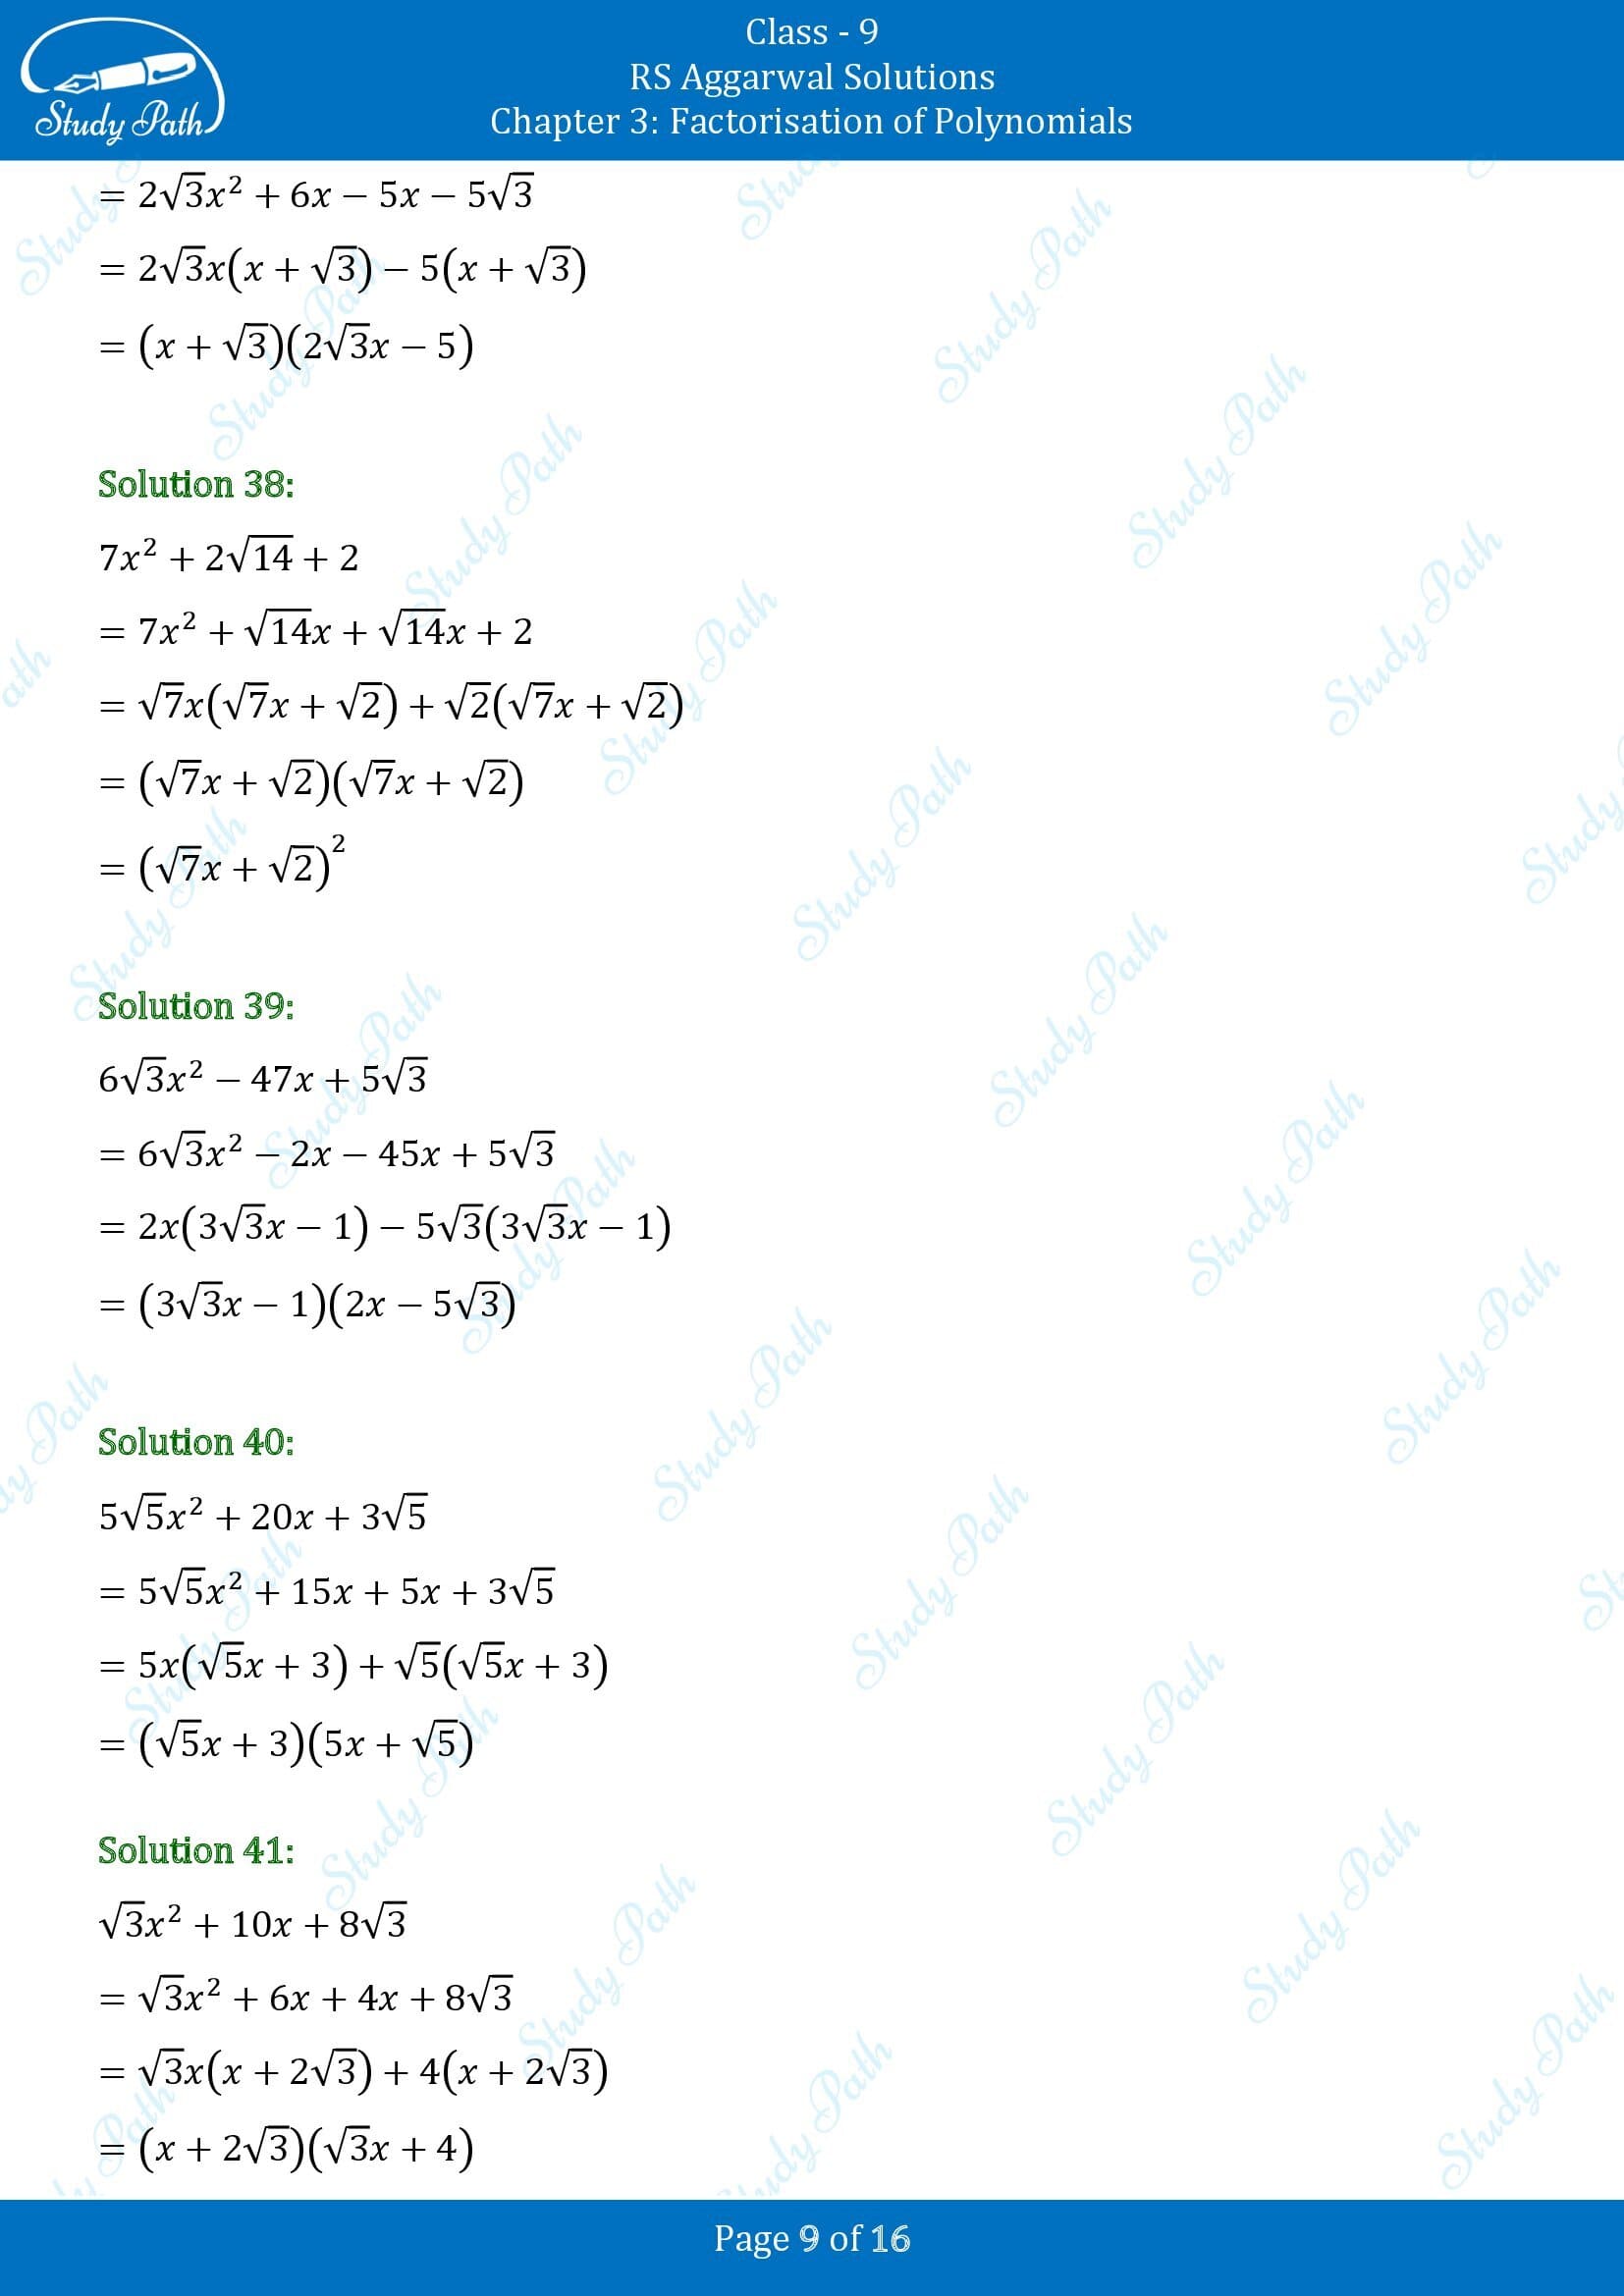 RS Aggarwal Solutions Class 9 Chapter 3 Factorisation of Polynomials Exercise 3C 00009